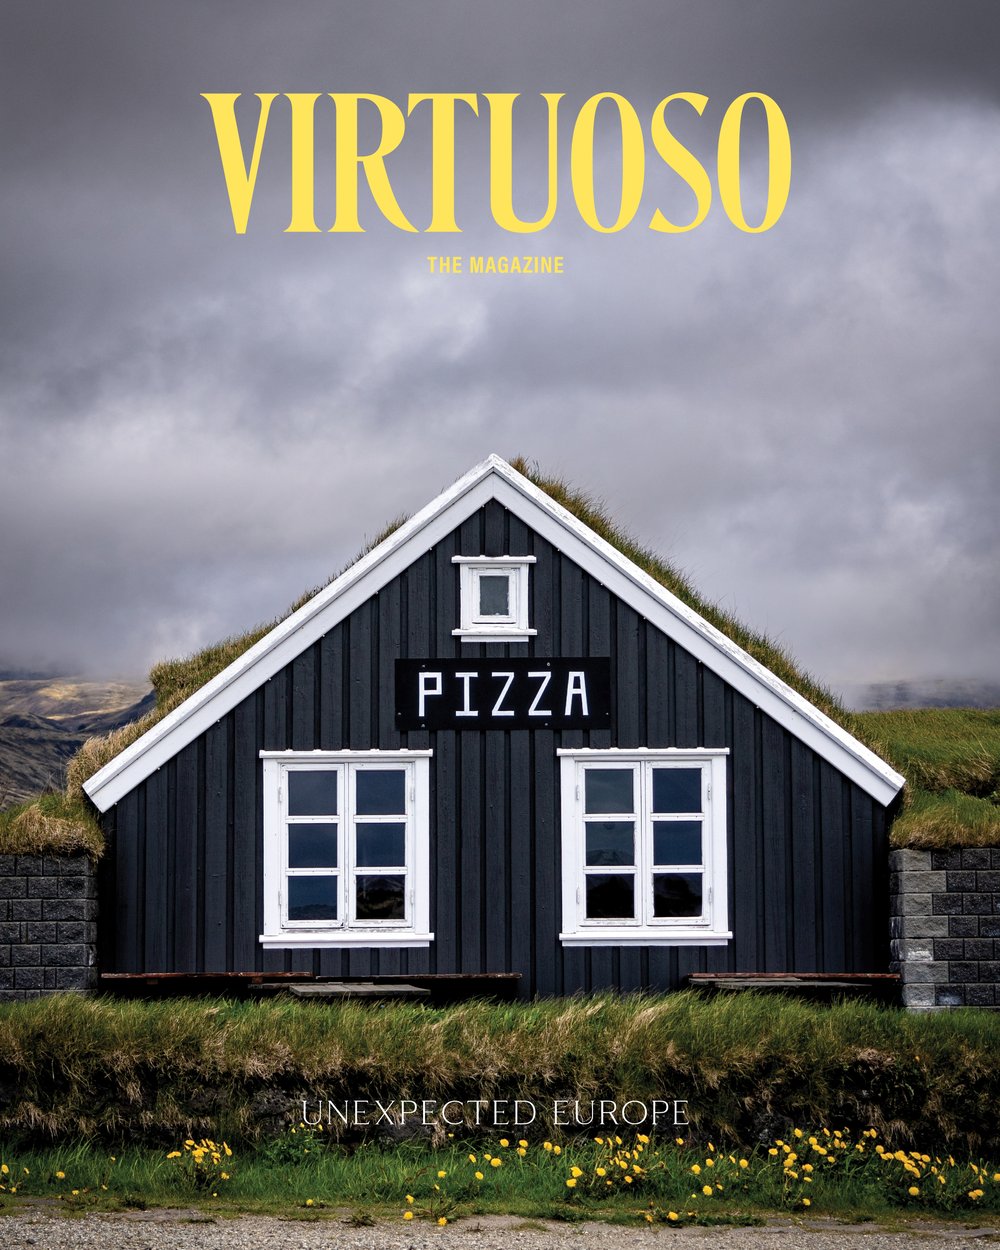 The January cover of Virtuoso, The Magazine shows a gray sod-roofed hut in Iceland labeled with the word “pizza.” The cover line reads “Unexpected Europe.”